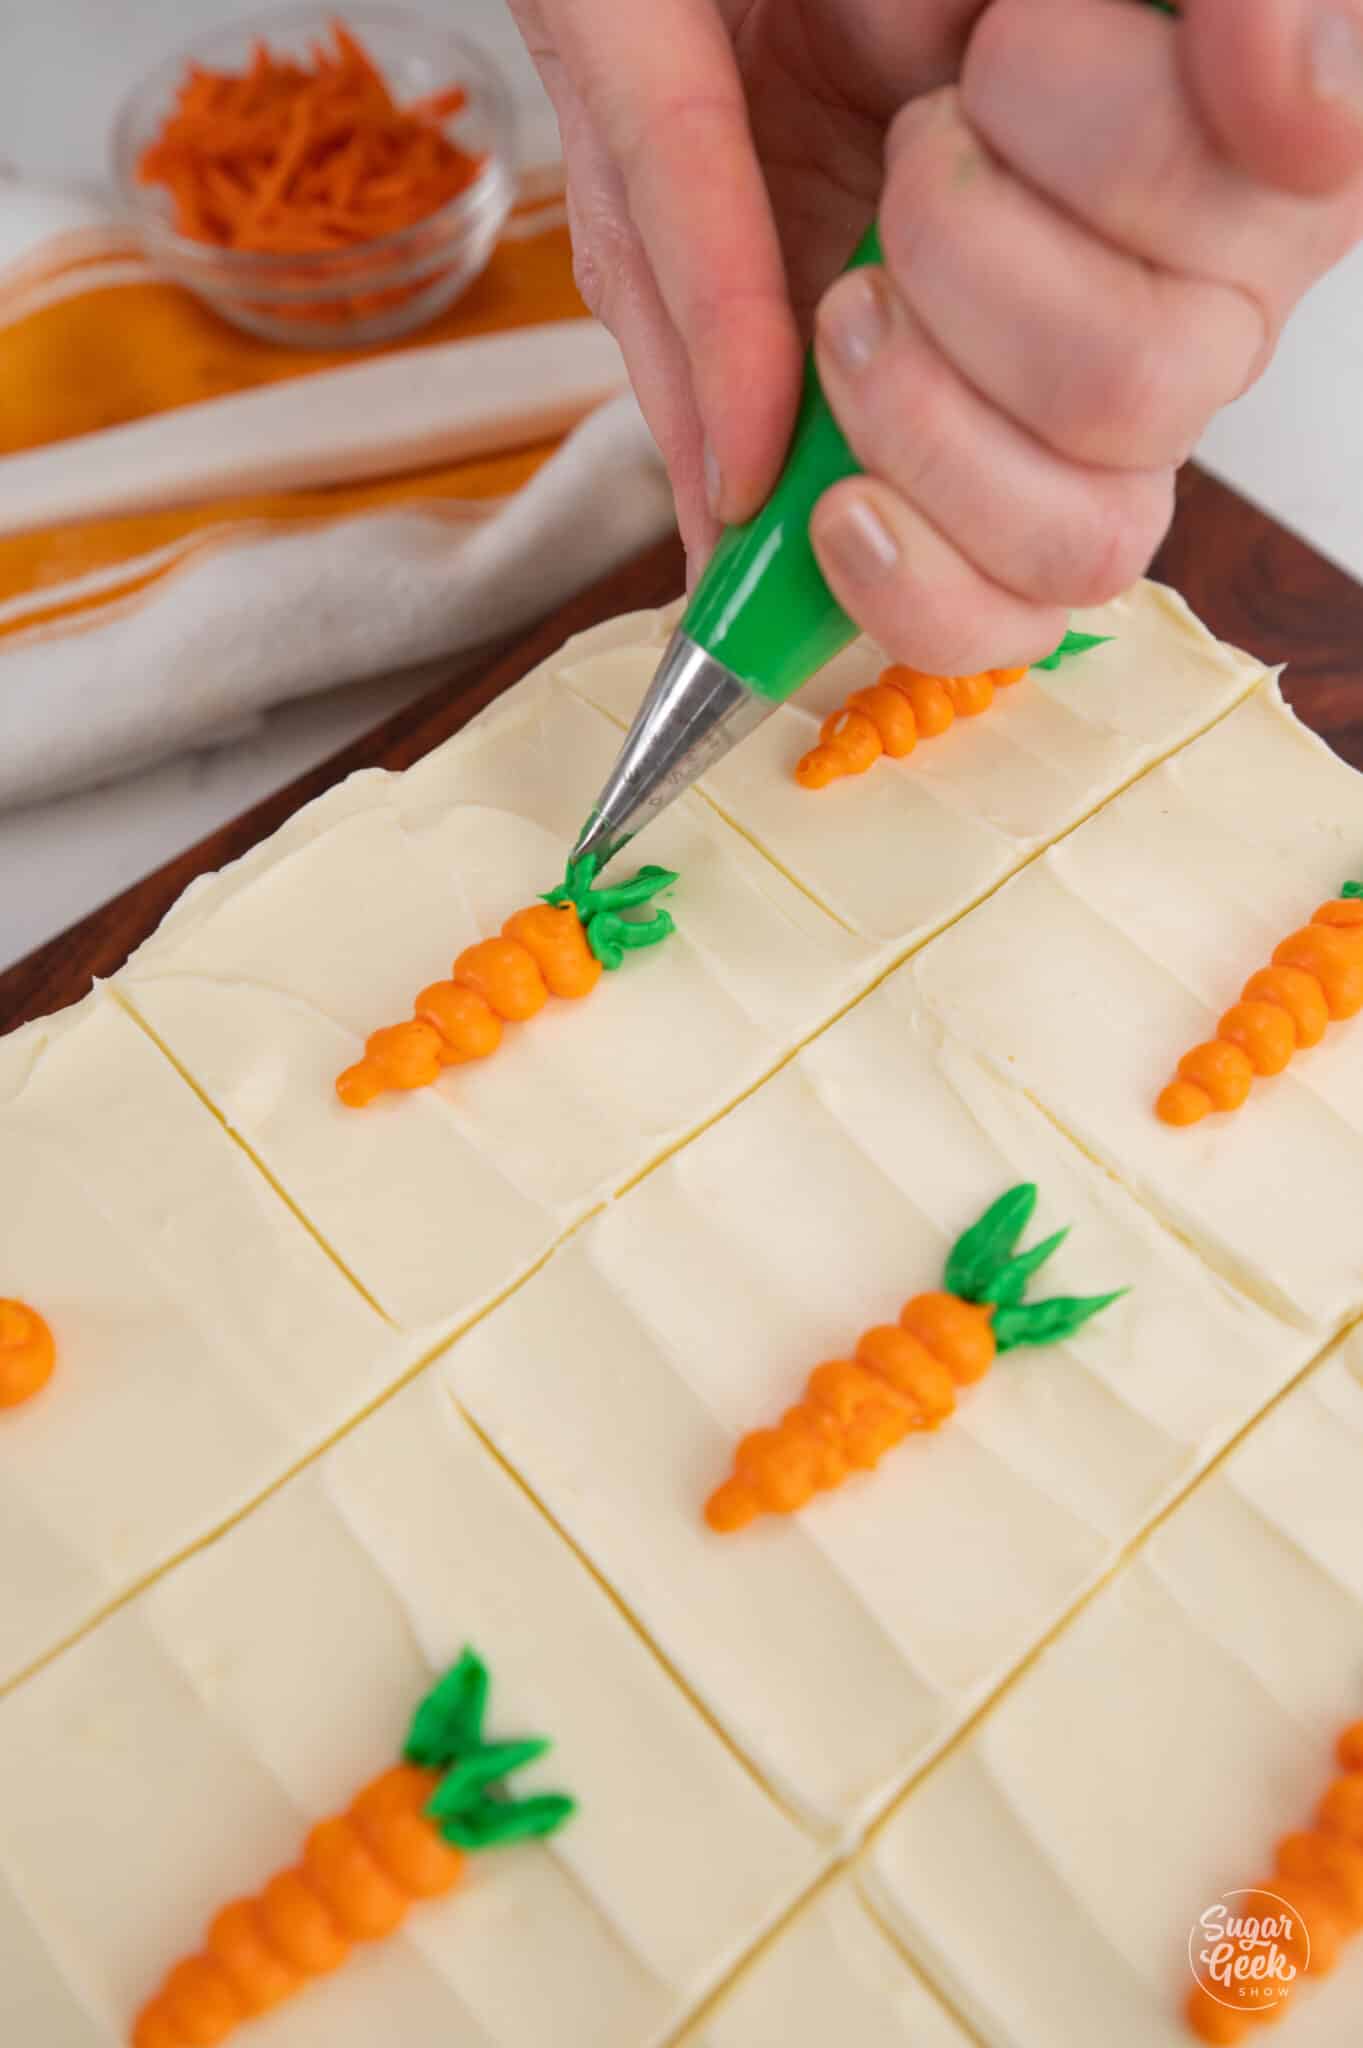 piping green frosting leaves next to a frosting carrot